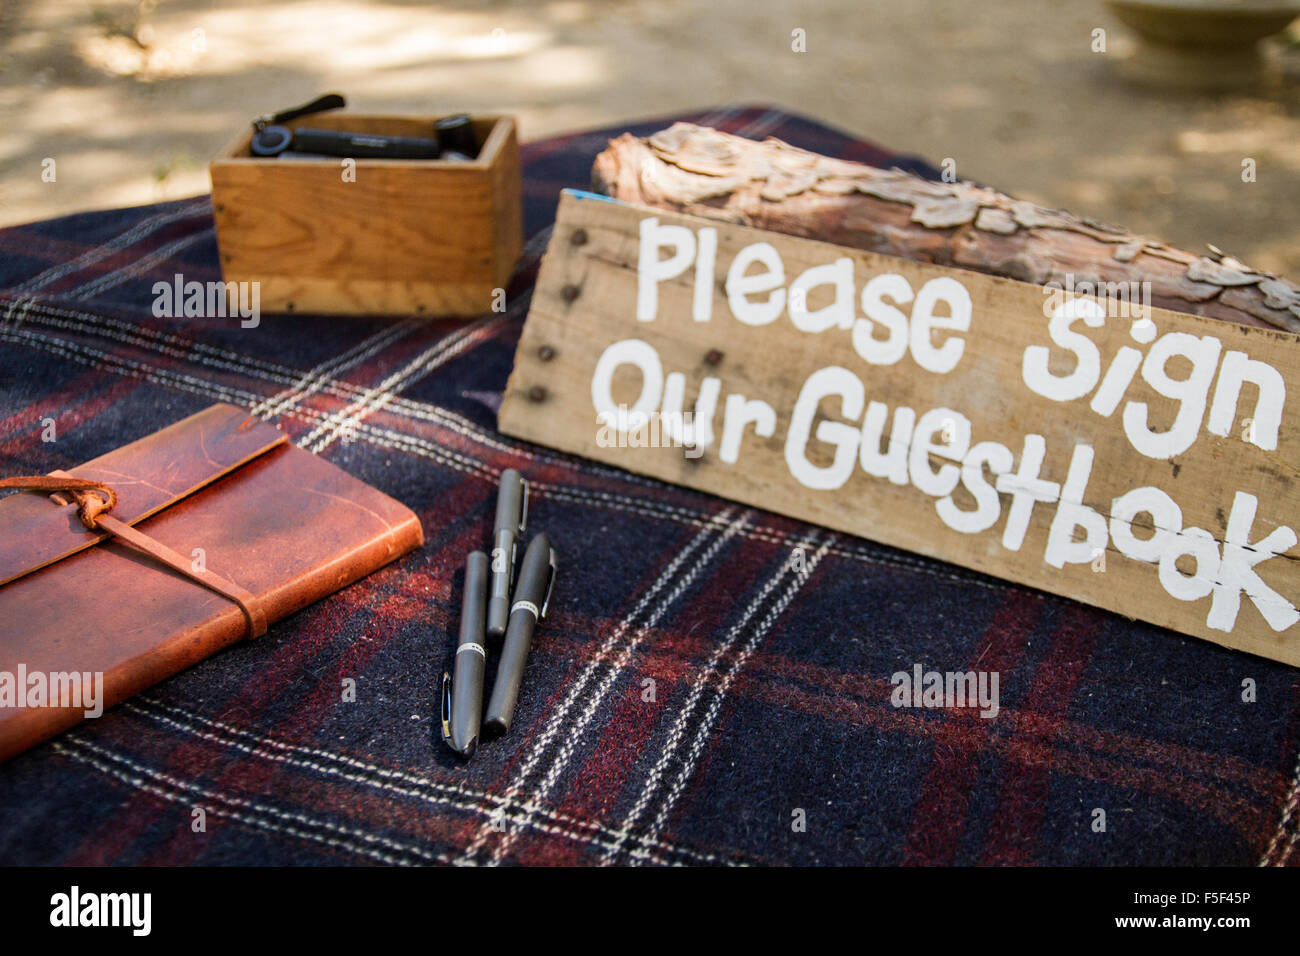 A rustic sign displaying the works 'please sign our guestbook' Stock Photo